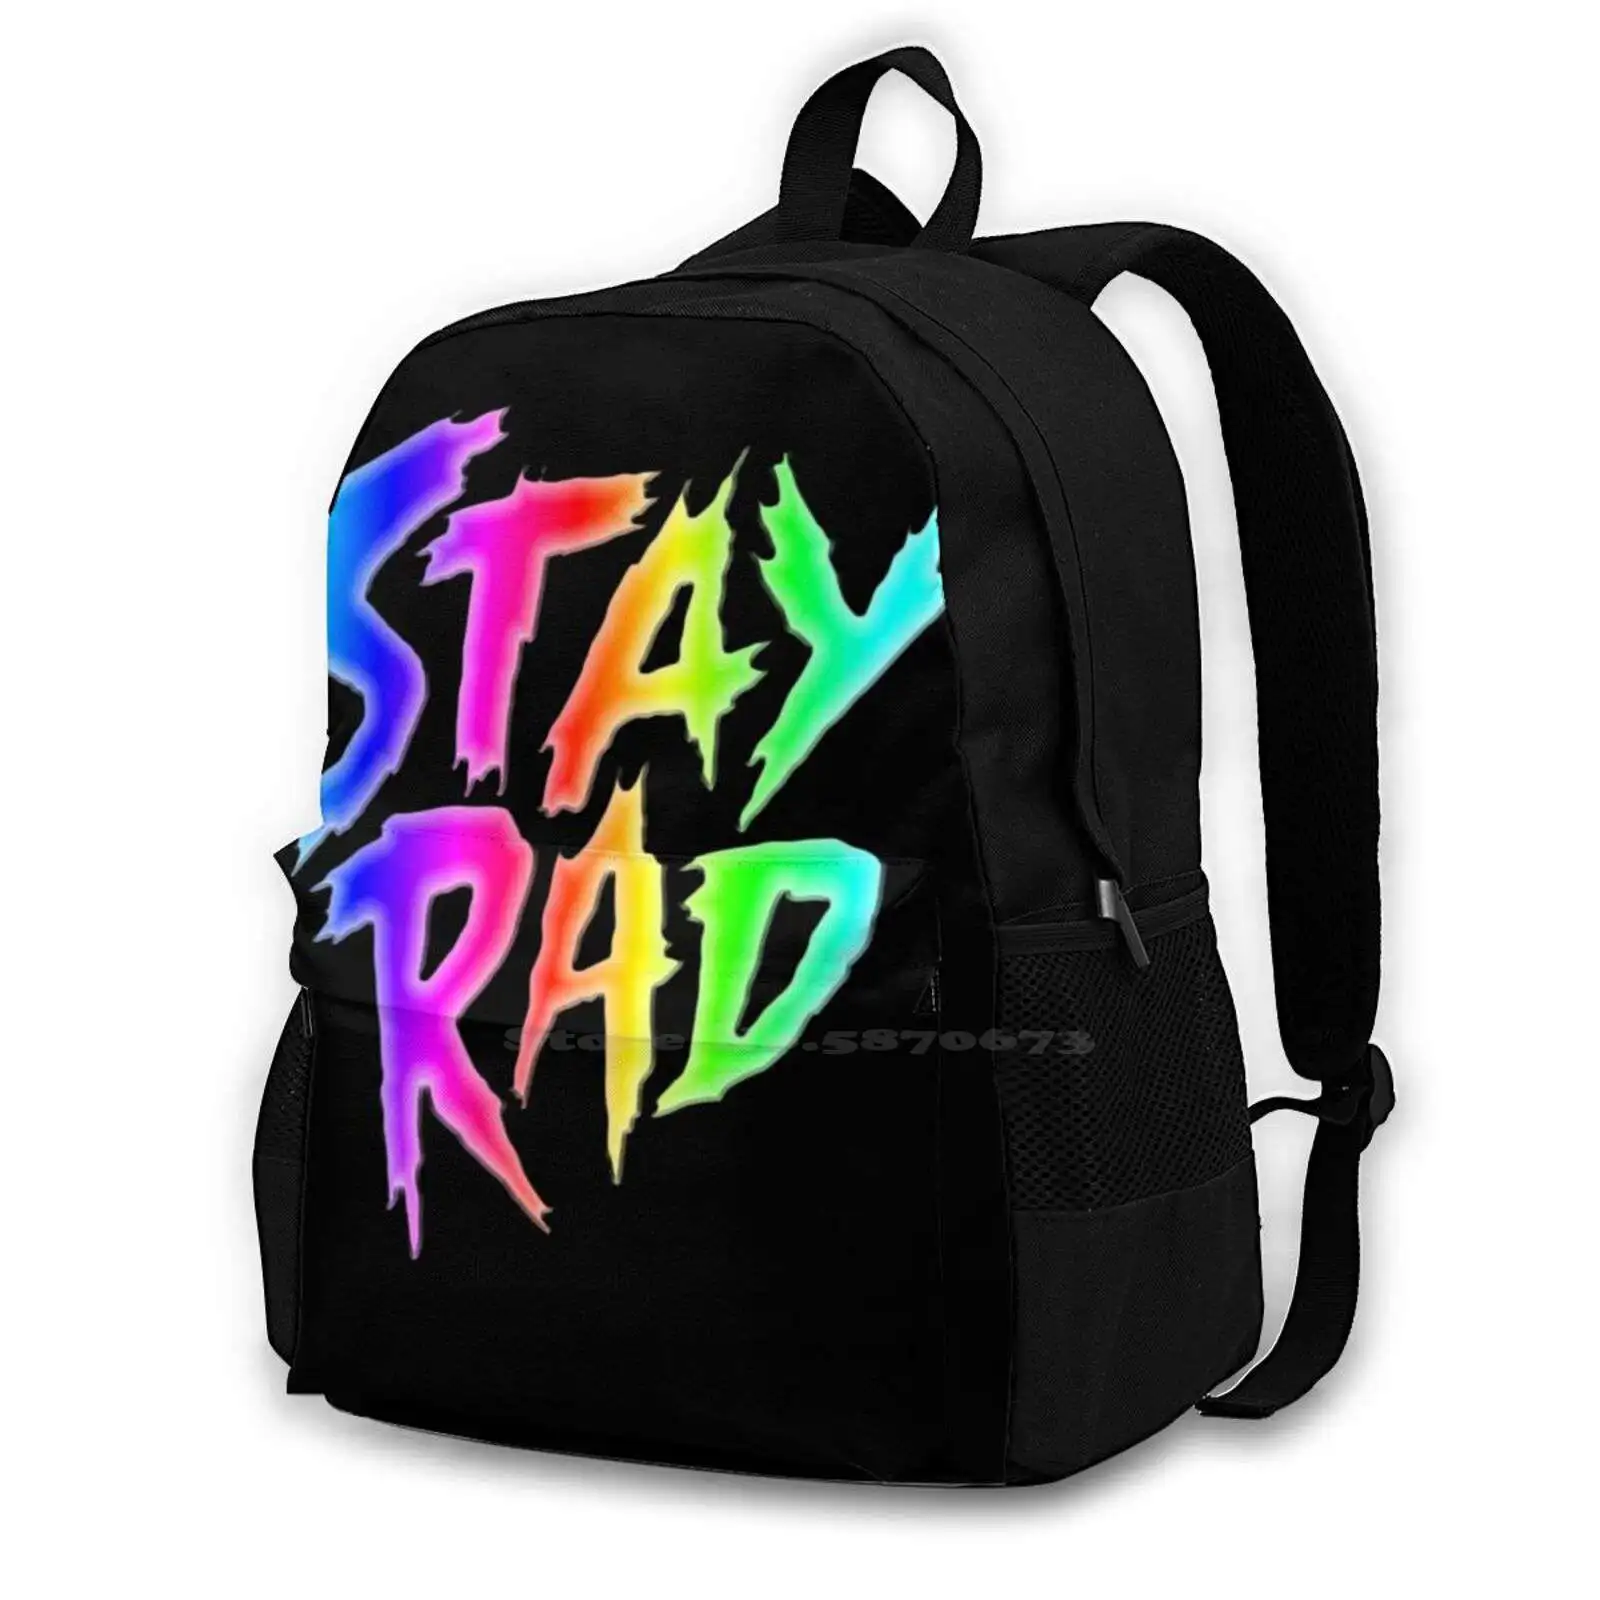 

Stay Rad - Rainbow - Airbrush Backpack For Student School Laptop Travel Bag Stay Rad Rad Airbrush Aibrush Radical Cool Awesome